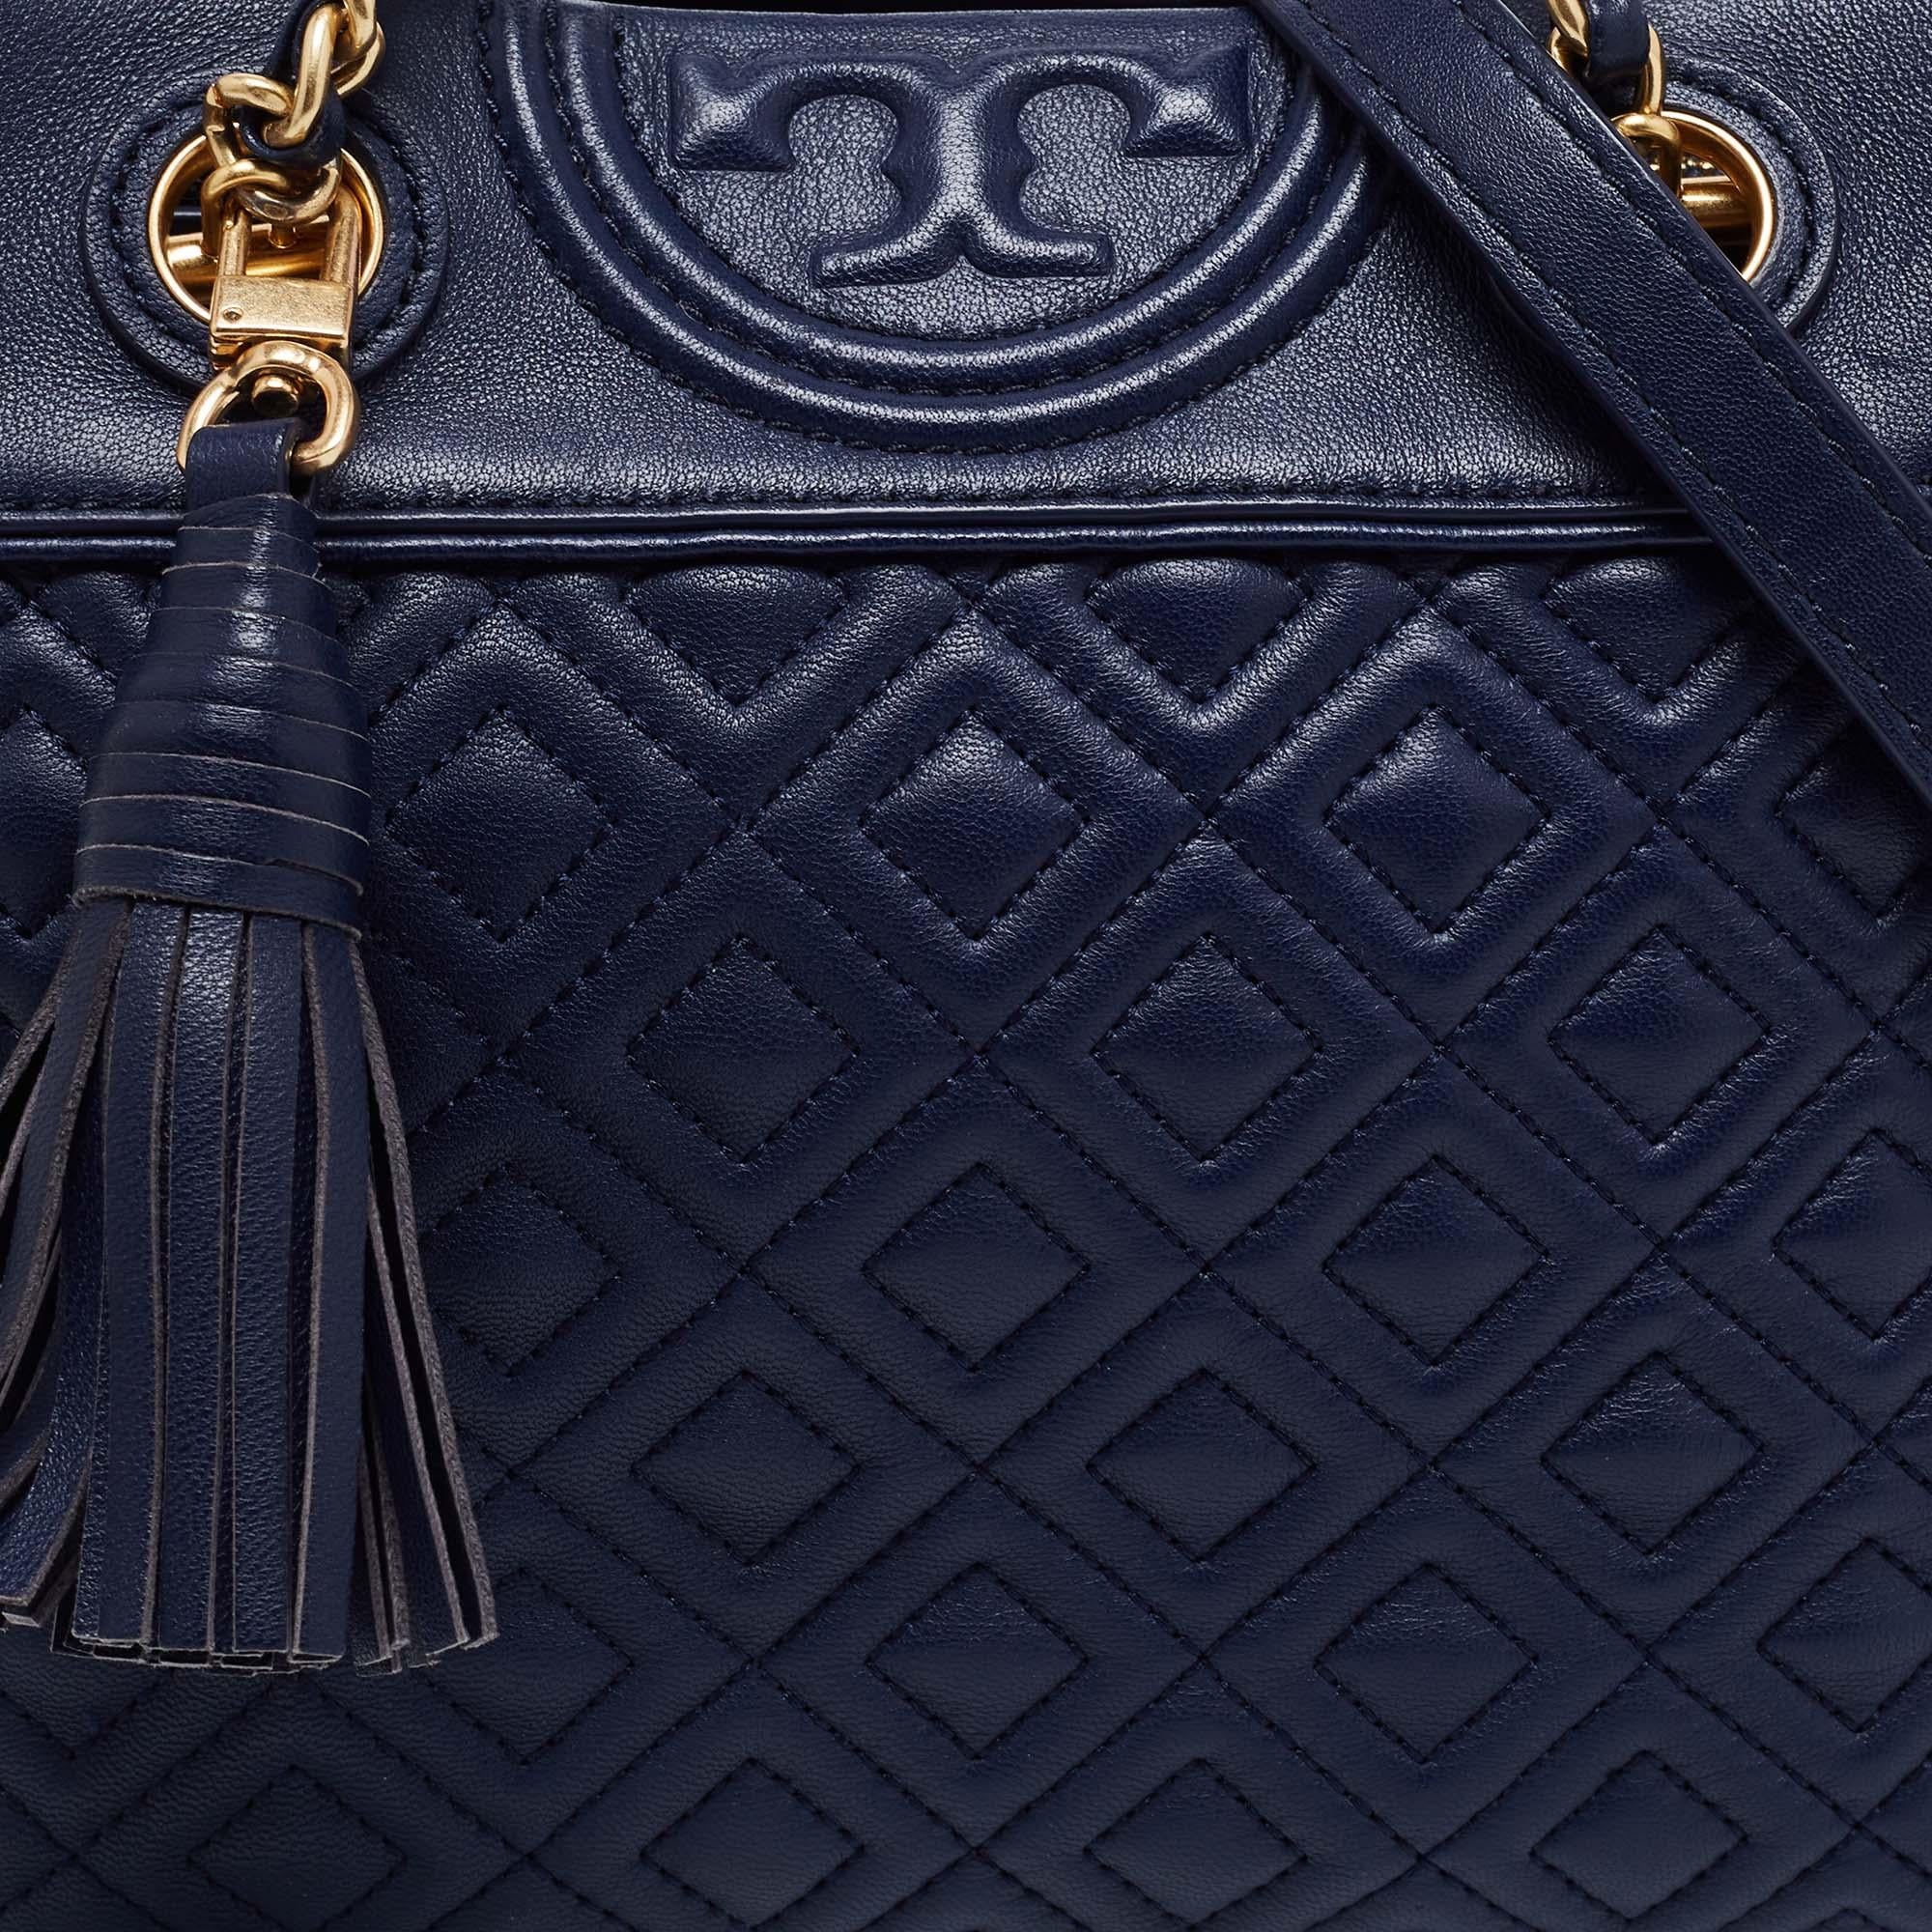 Tory Burch Blue Leather Fleming Tote 7